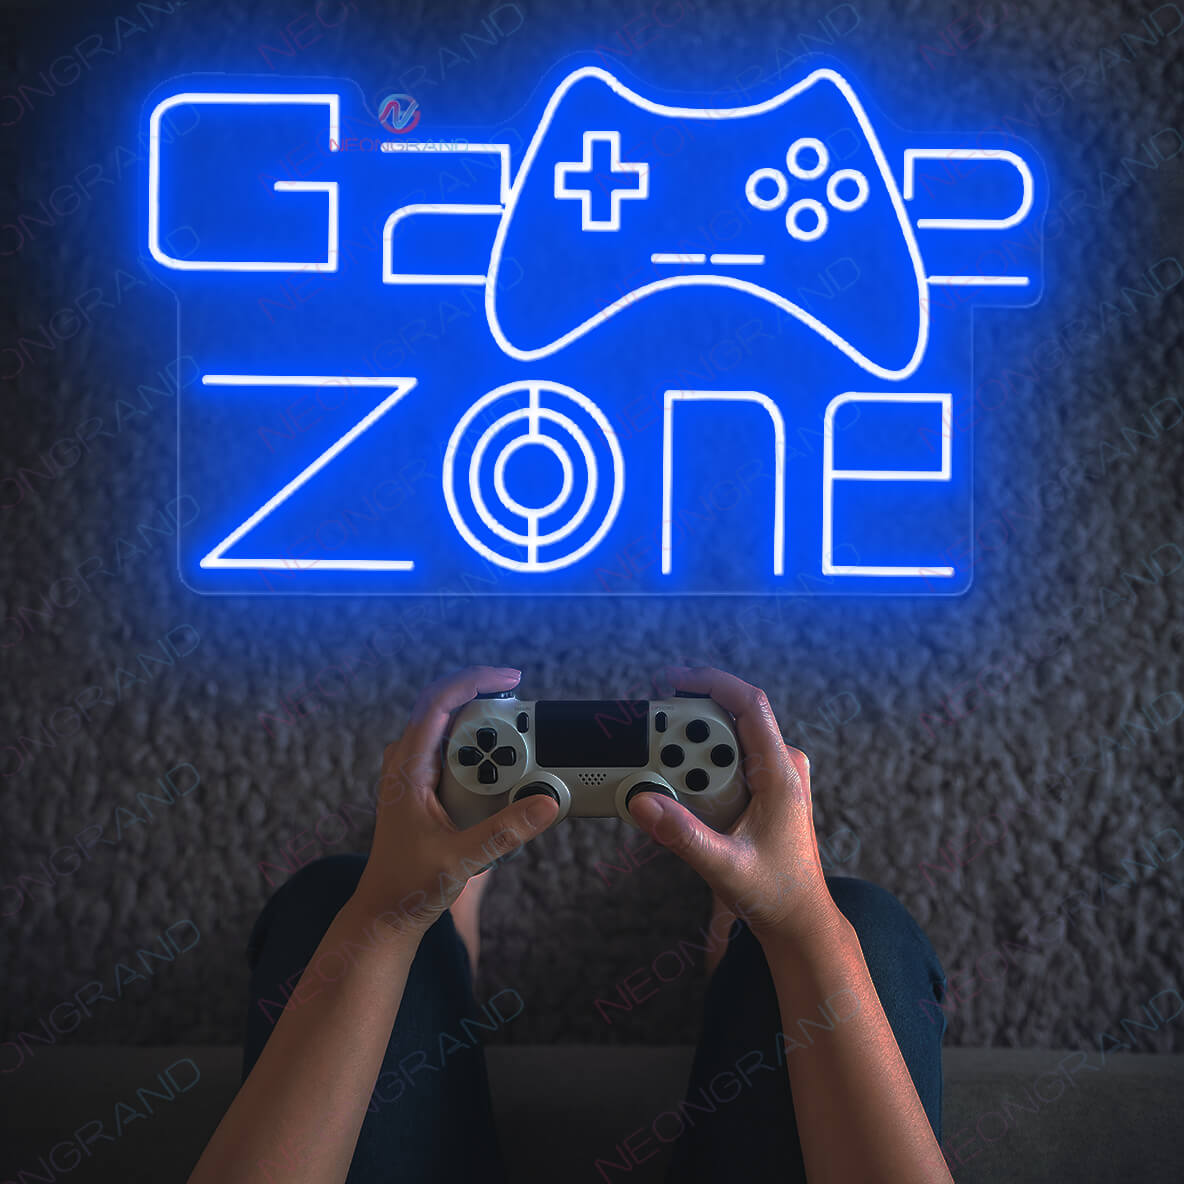 Games Neon Sign Game Zone Arcade Led Neon Light blue wm